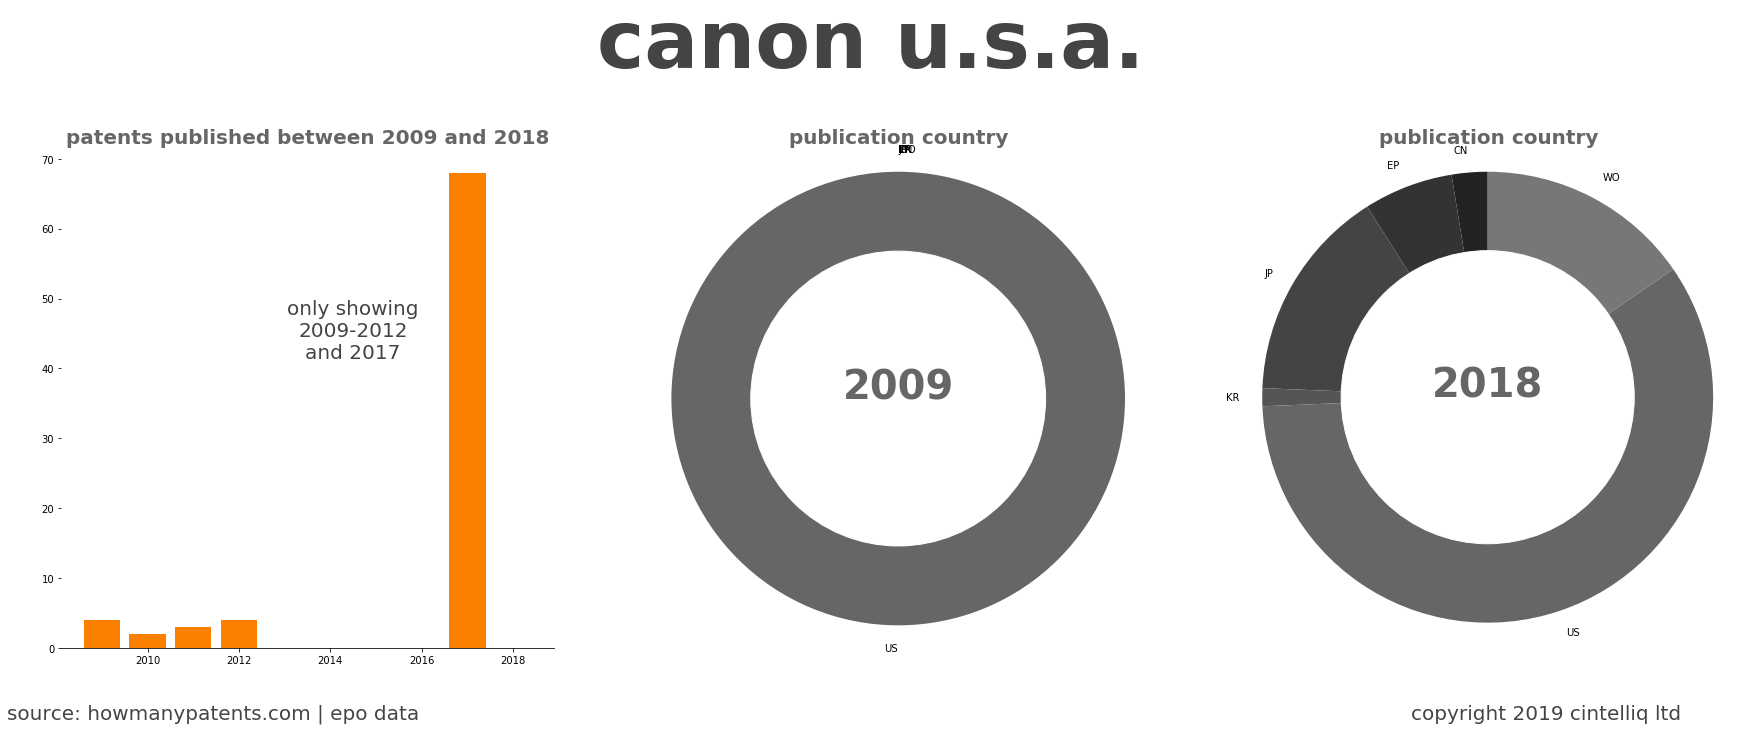 summary of patents for Canon U.S.A.